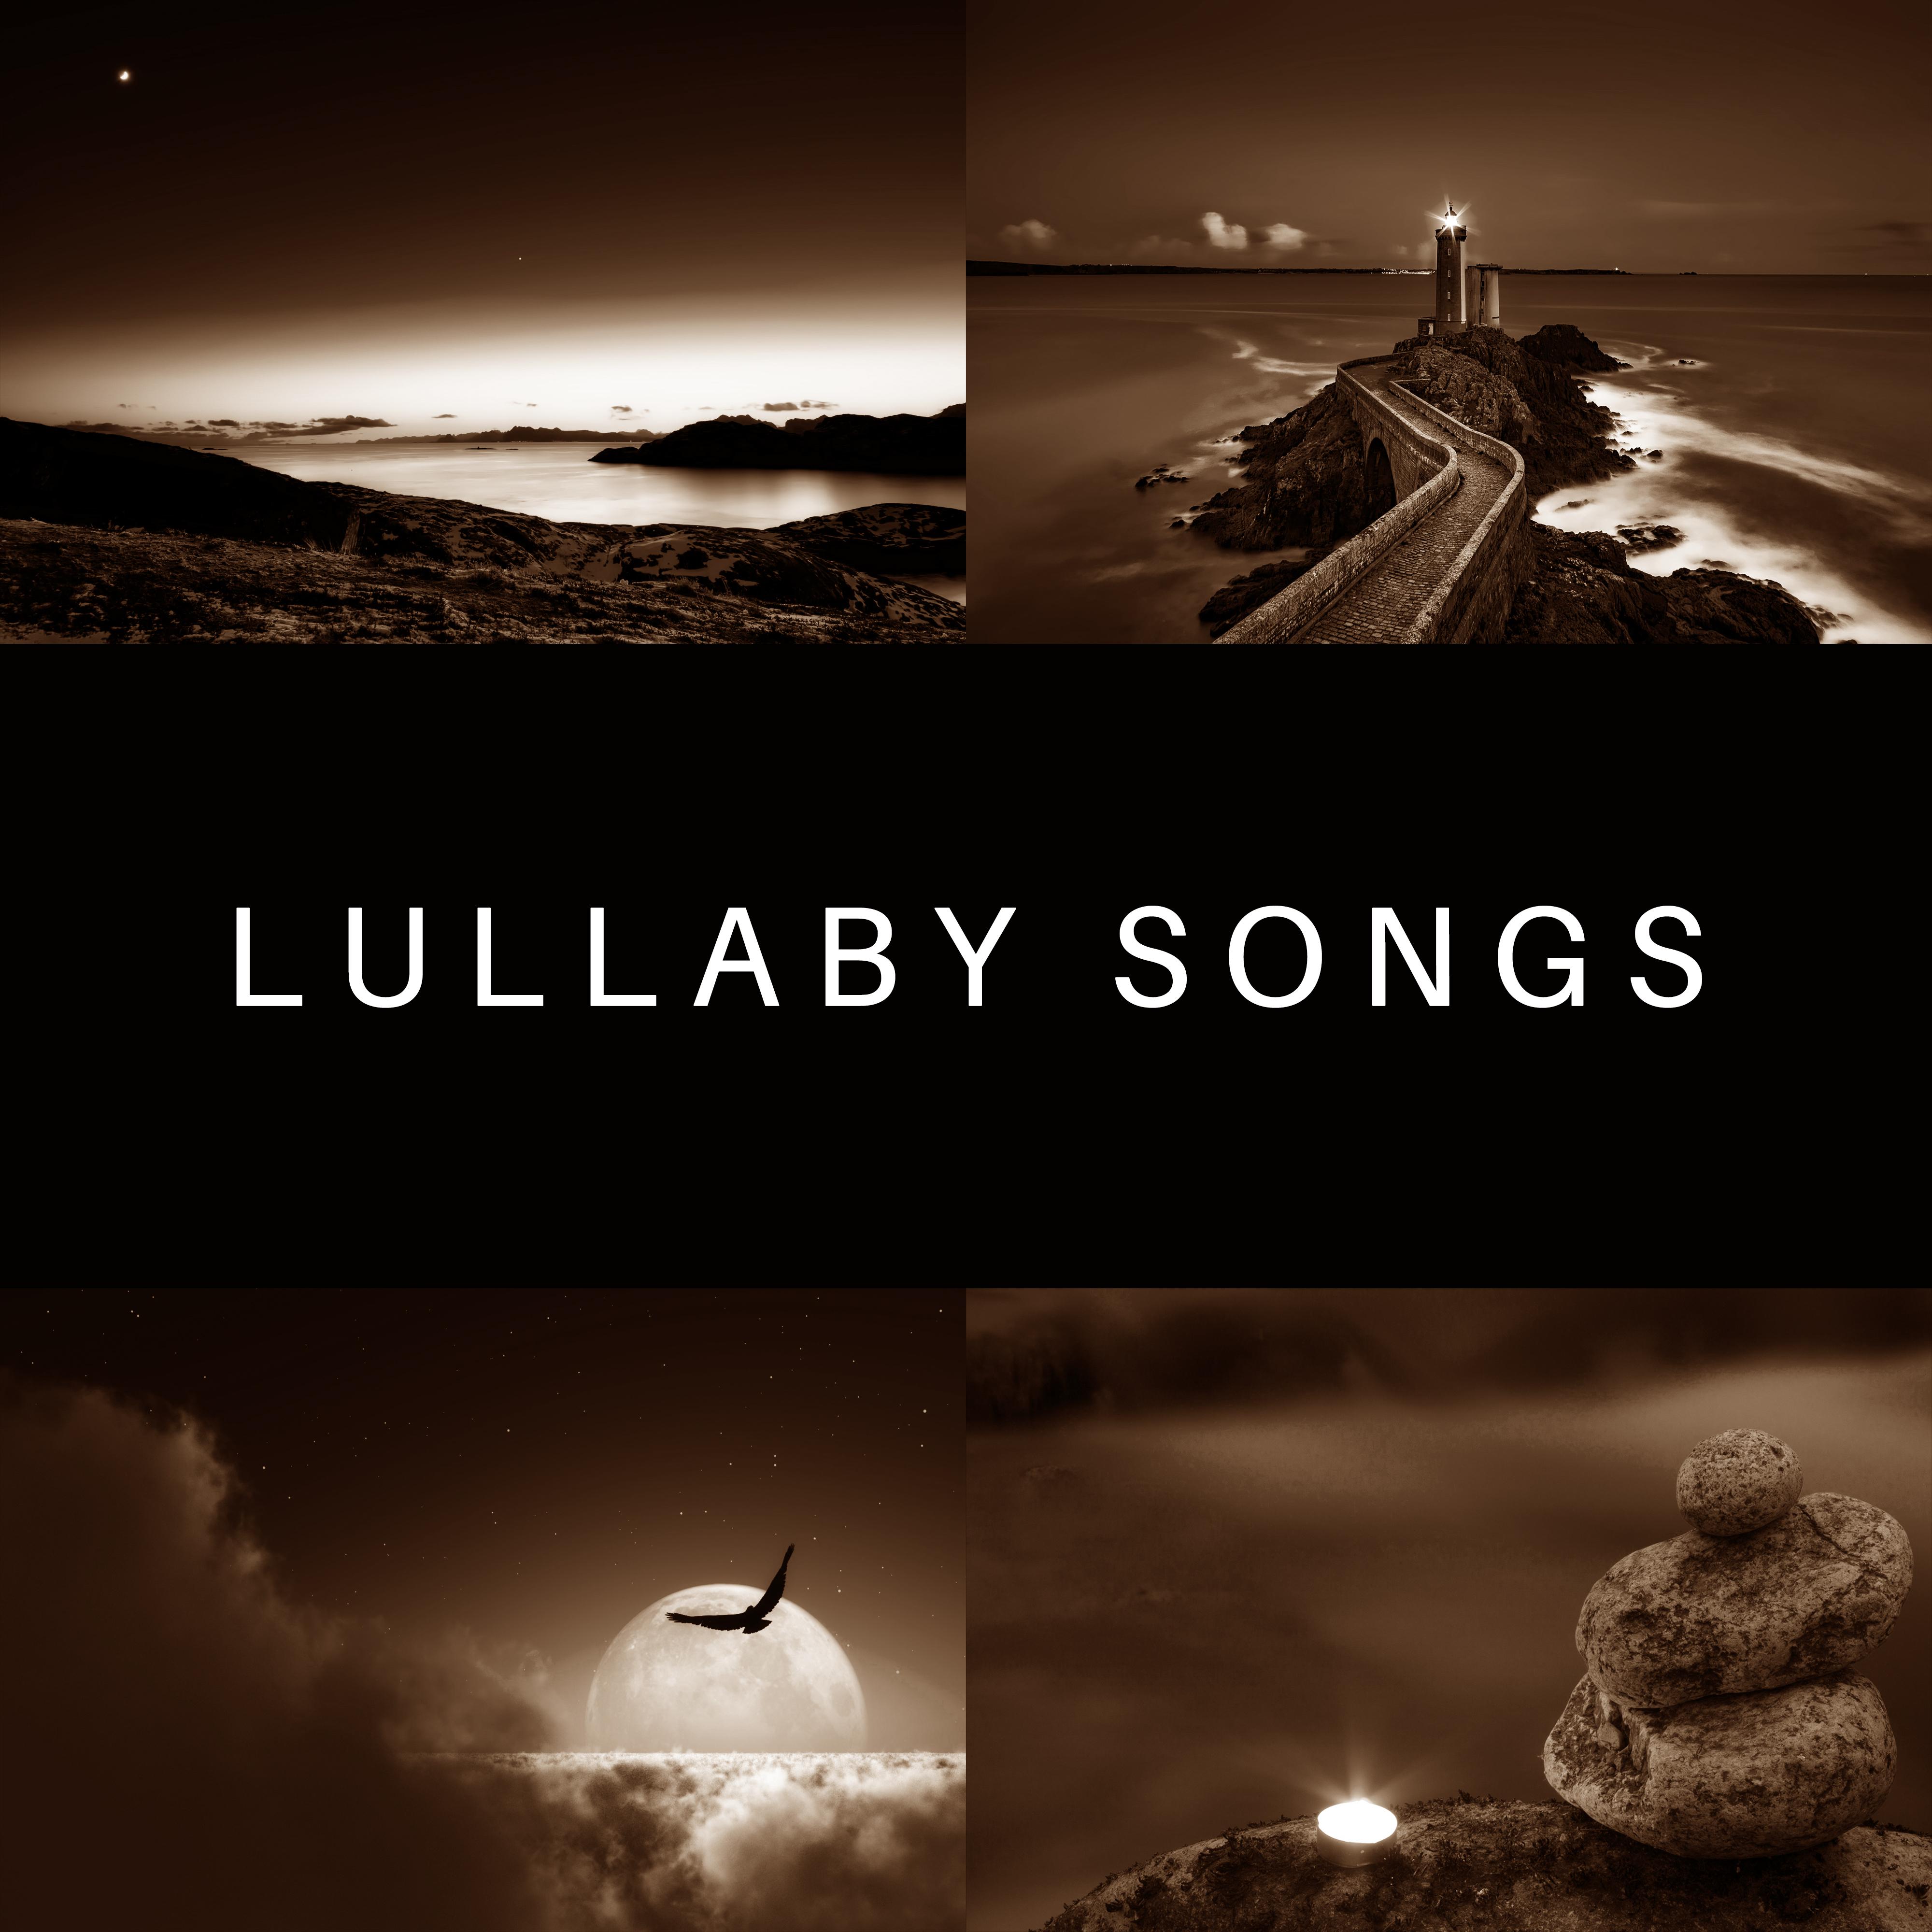 Lullaby Songs – Pure Nature Sounds, Relaxation & Meditation, Sleep Music, Lullabies